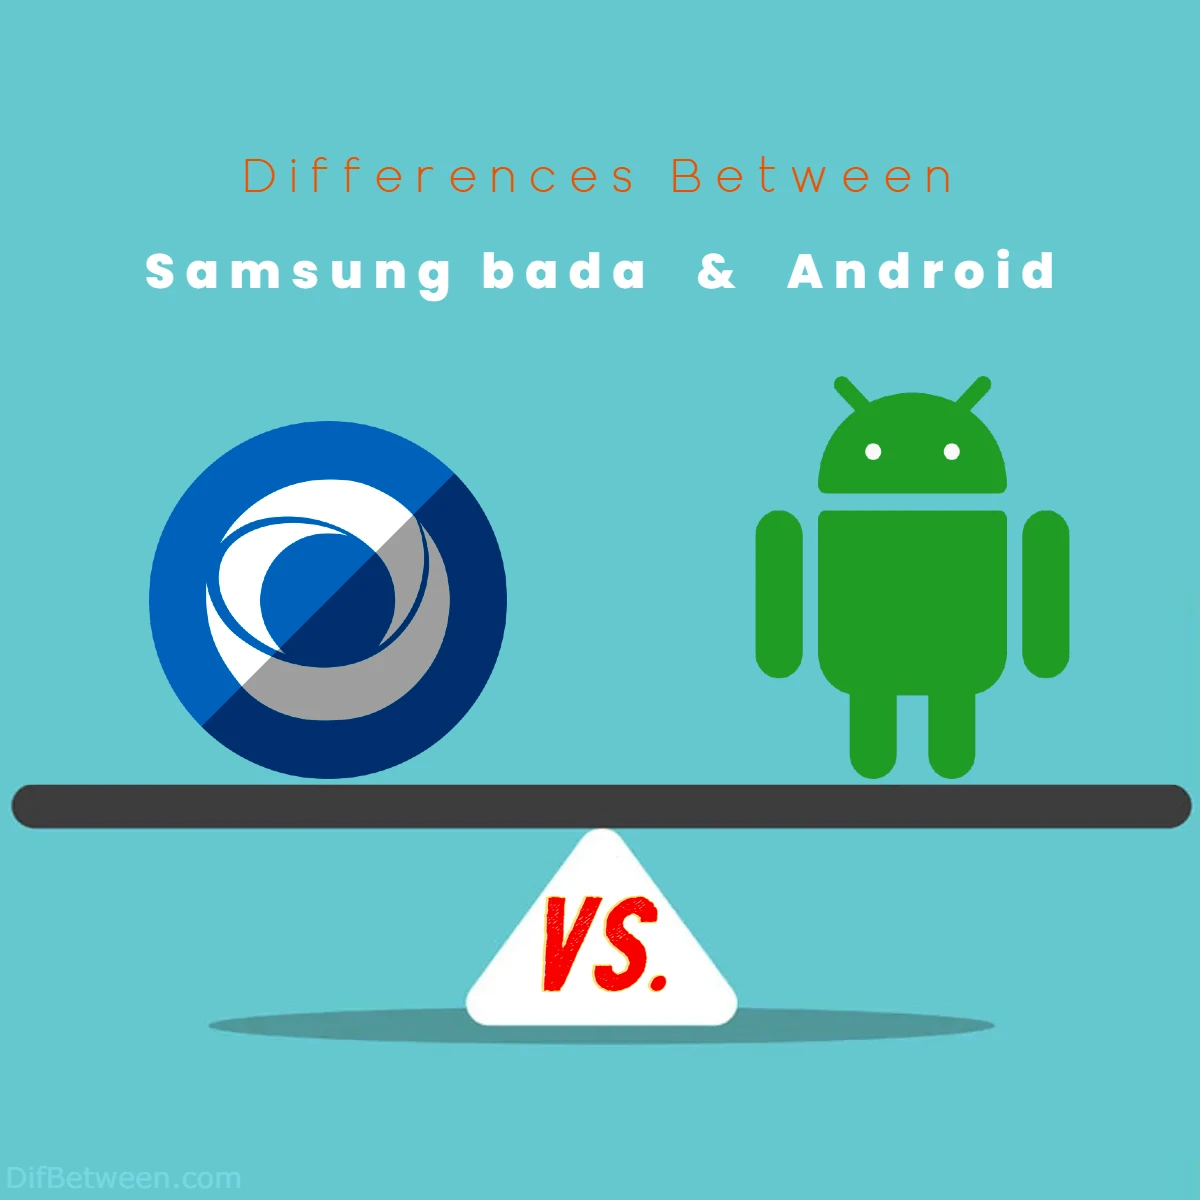 Differences Between Samsung bada vs Android